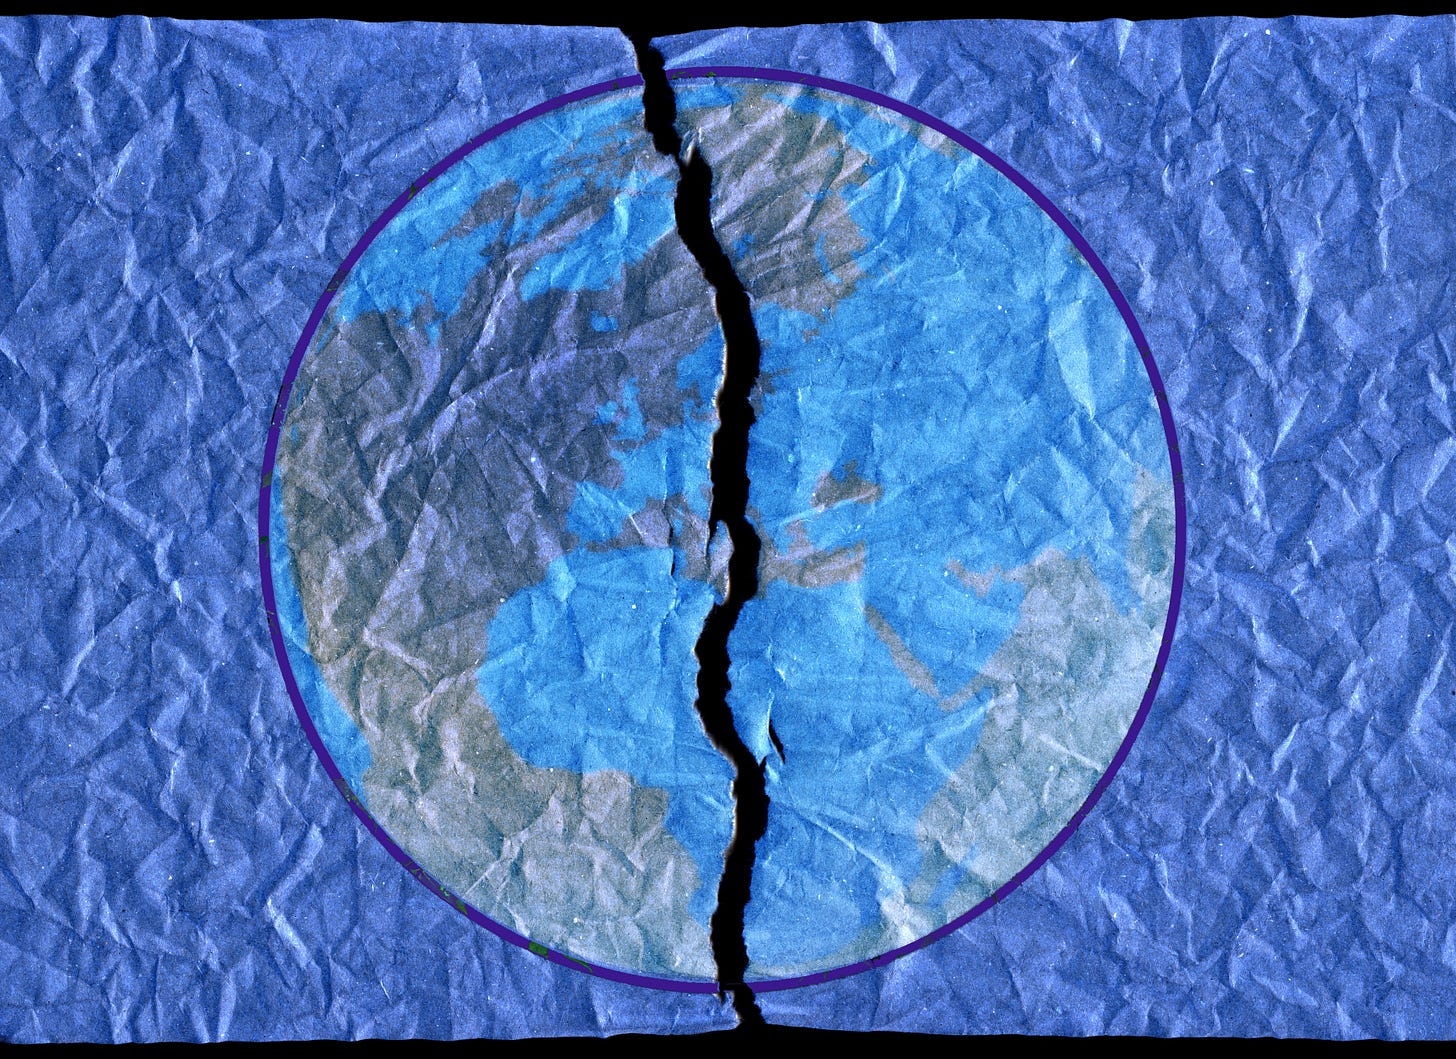 A drawn earth in blue tones, drawn on a crumpled piece of blue paper, vertically ripped in half on top of a black background